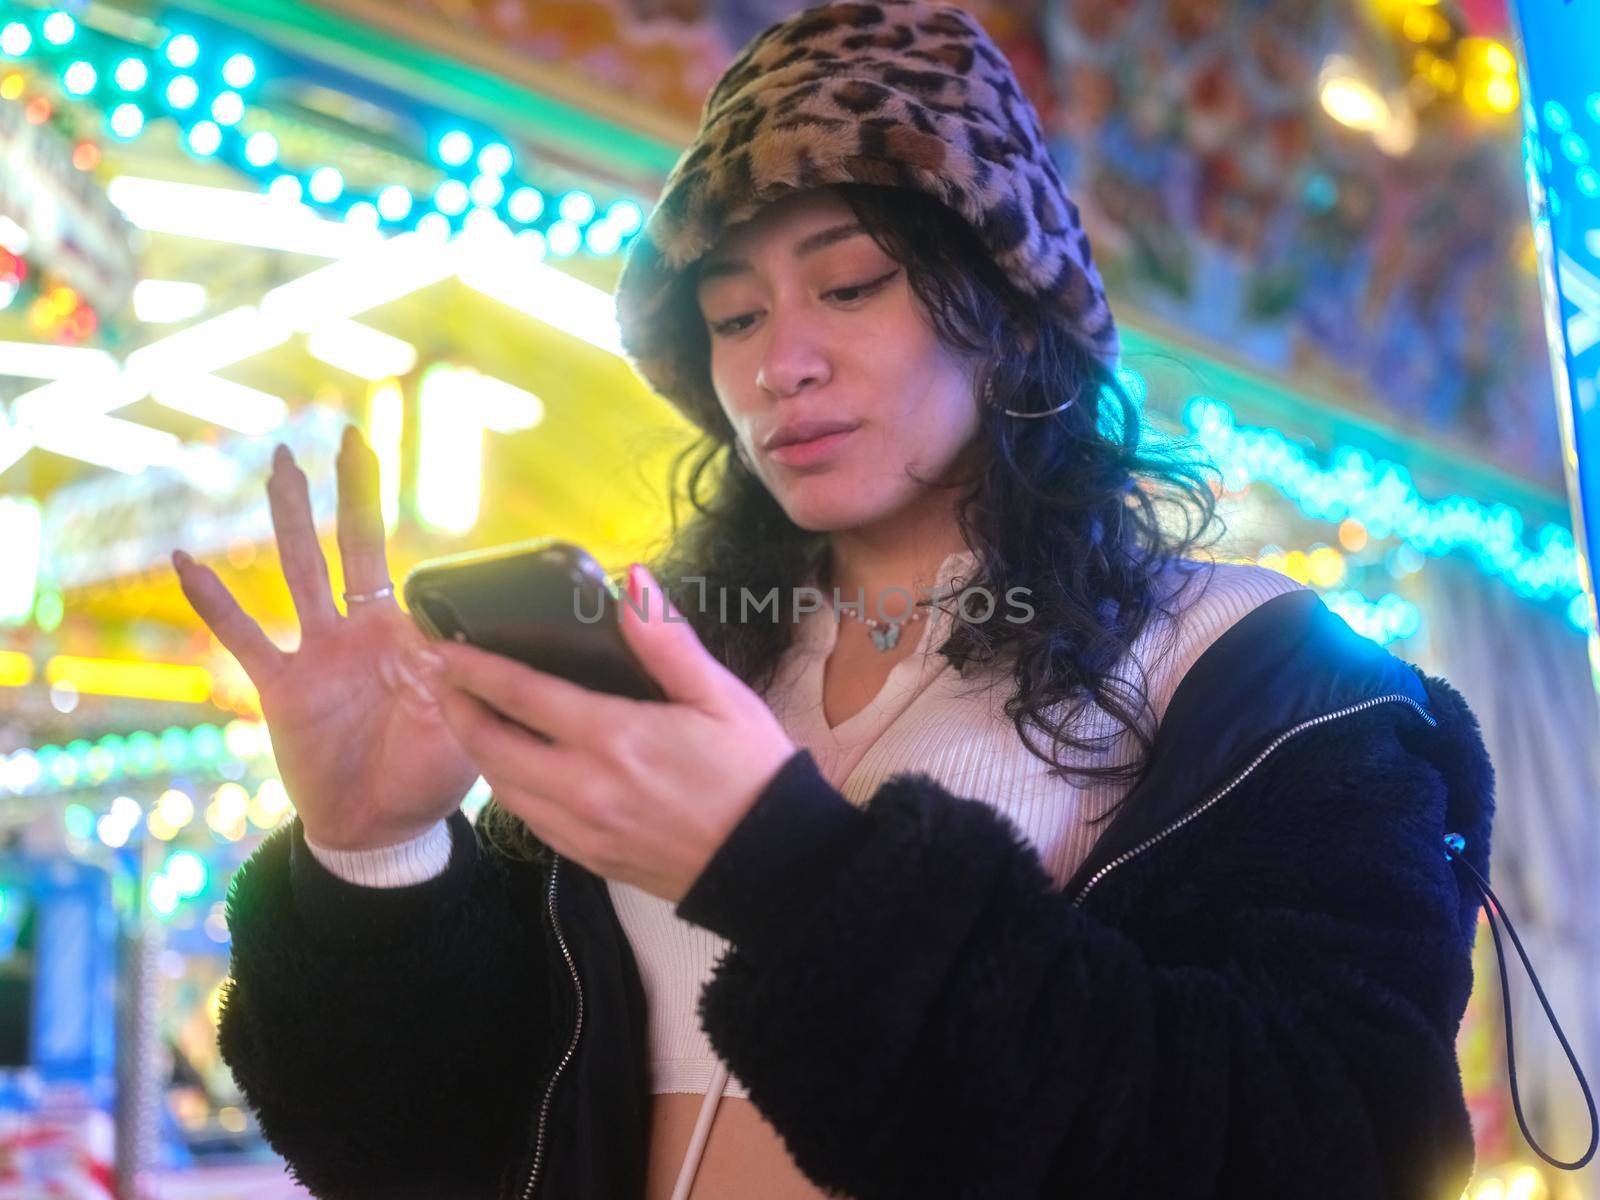 Latina woman in hat typing on her mobile phone while standing in front of a fairground ride at night